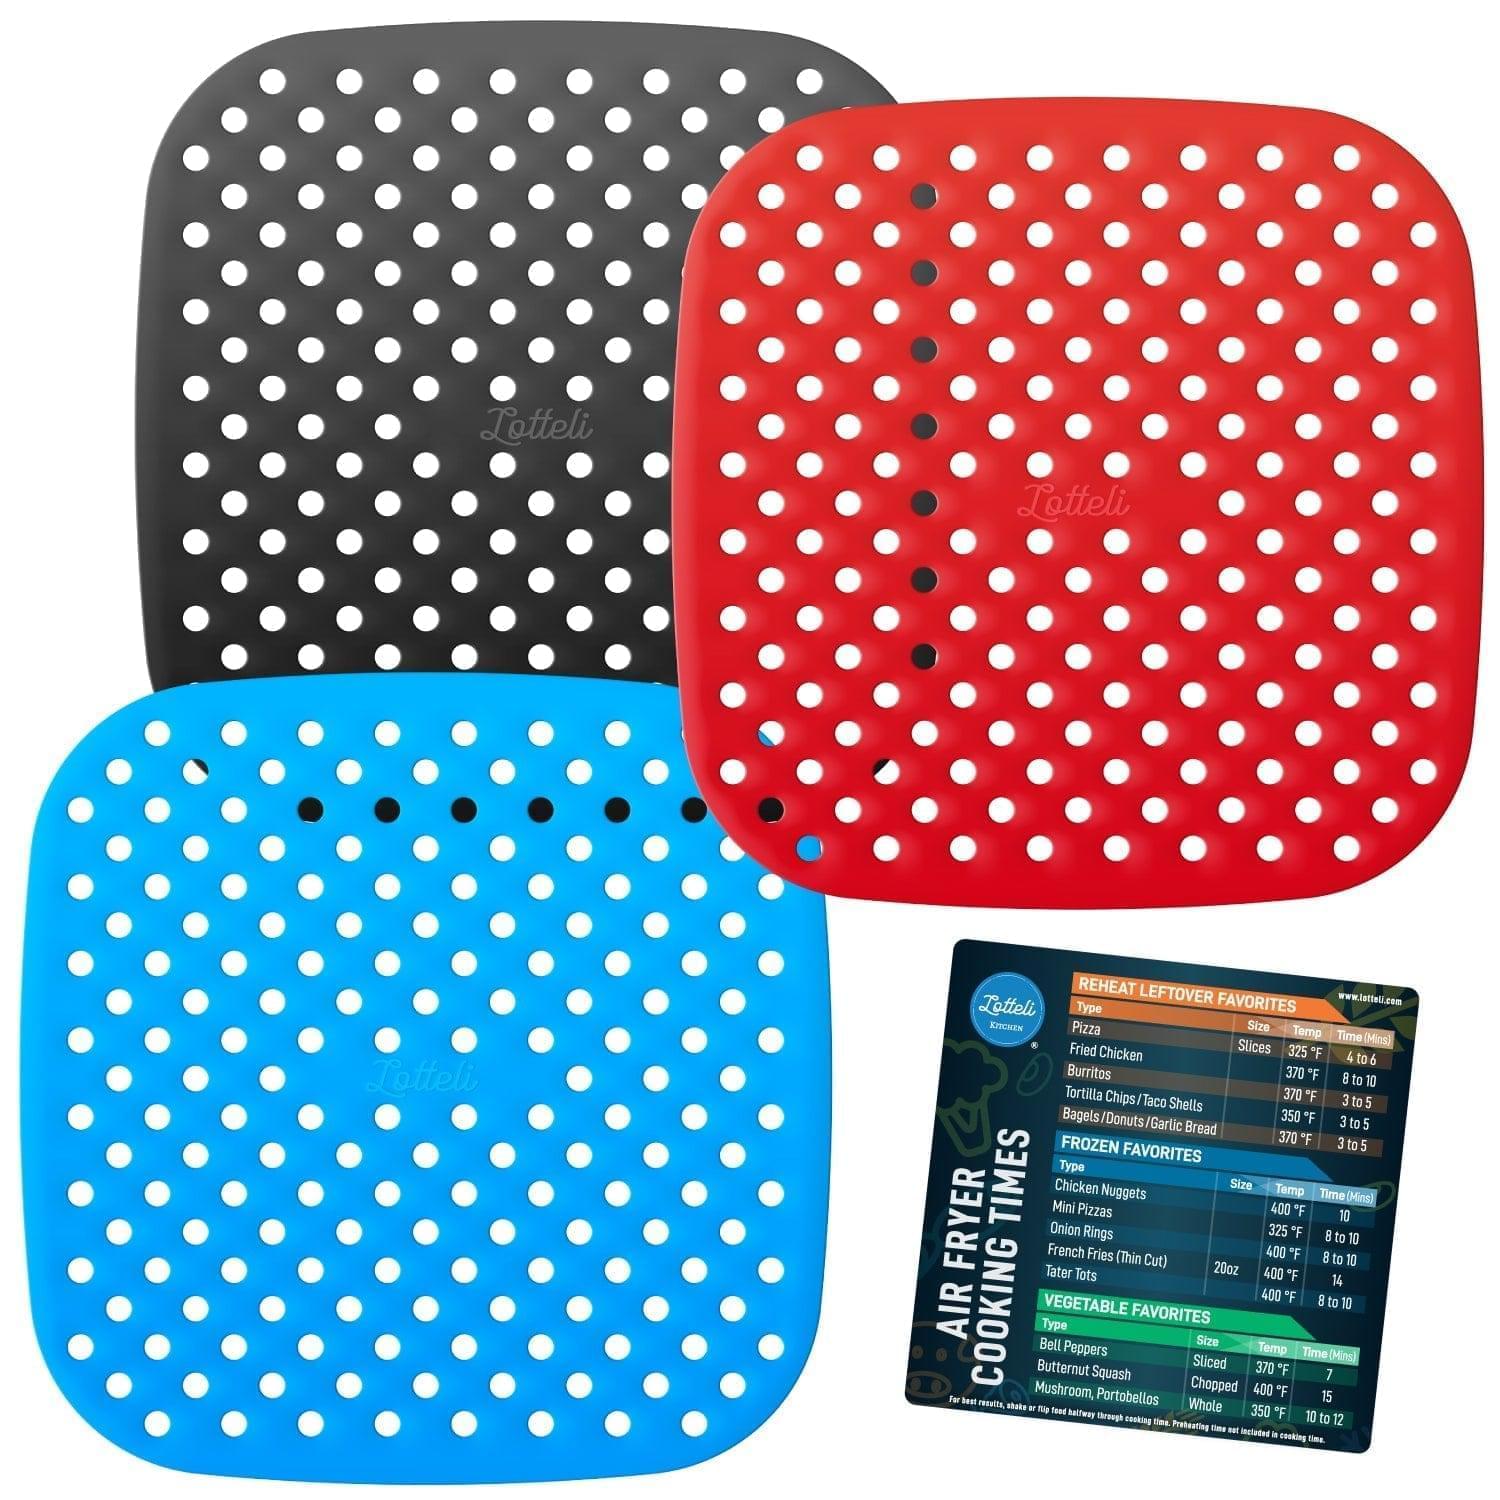 Reusable Air Fryer Liners Mats Accessories for Cosori,Instant